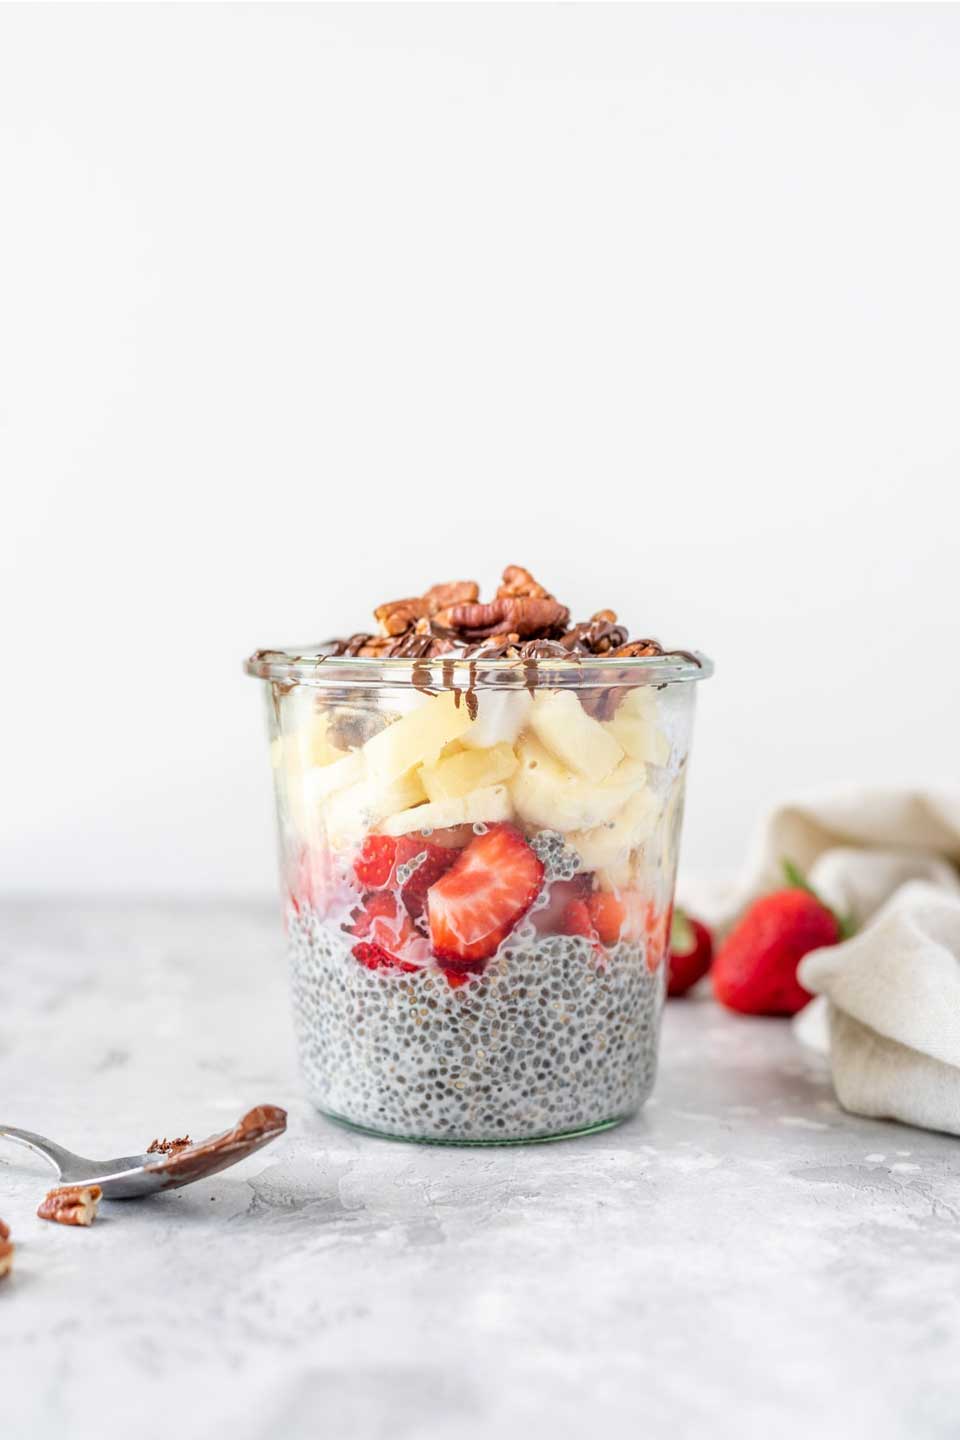 Side view in a glass jar so you can see the bottom layer of chia pudding, topped with sliced strawberries, then pineapple and bananas, then pecans and chocolate drizzle.